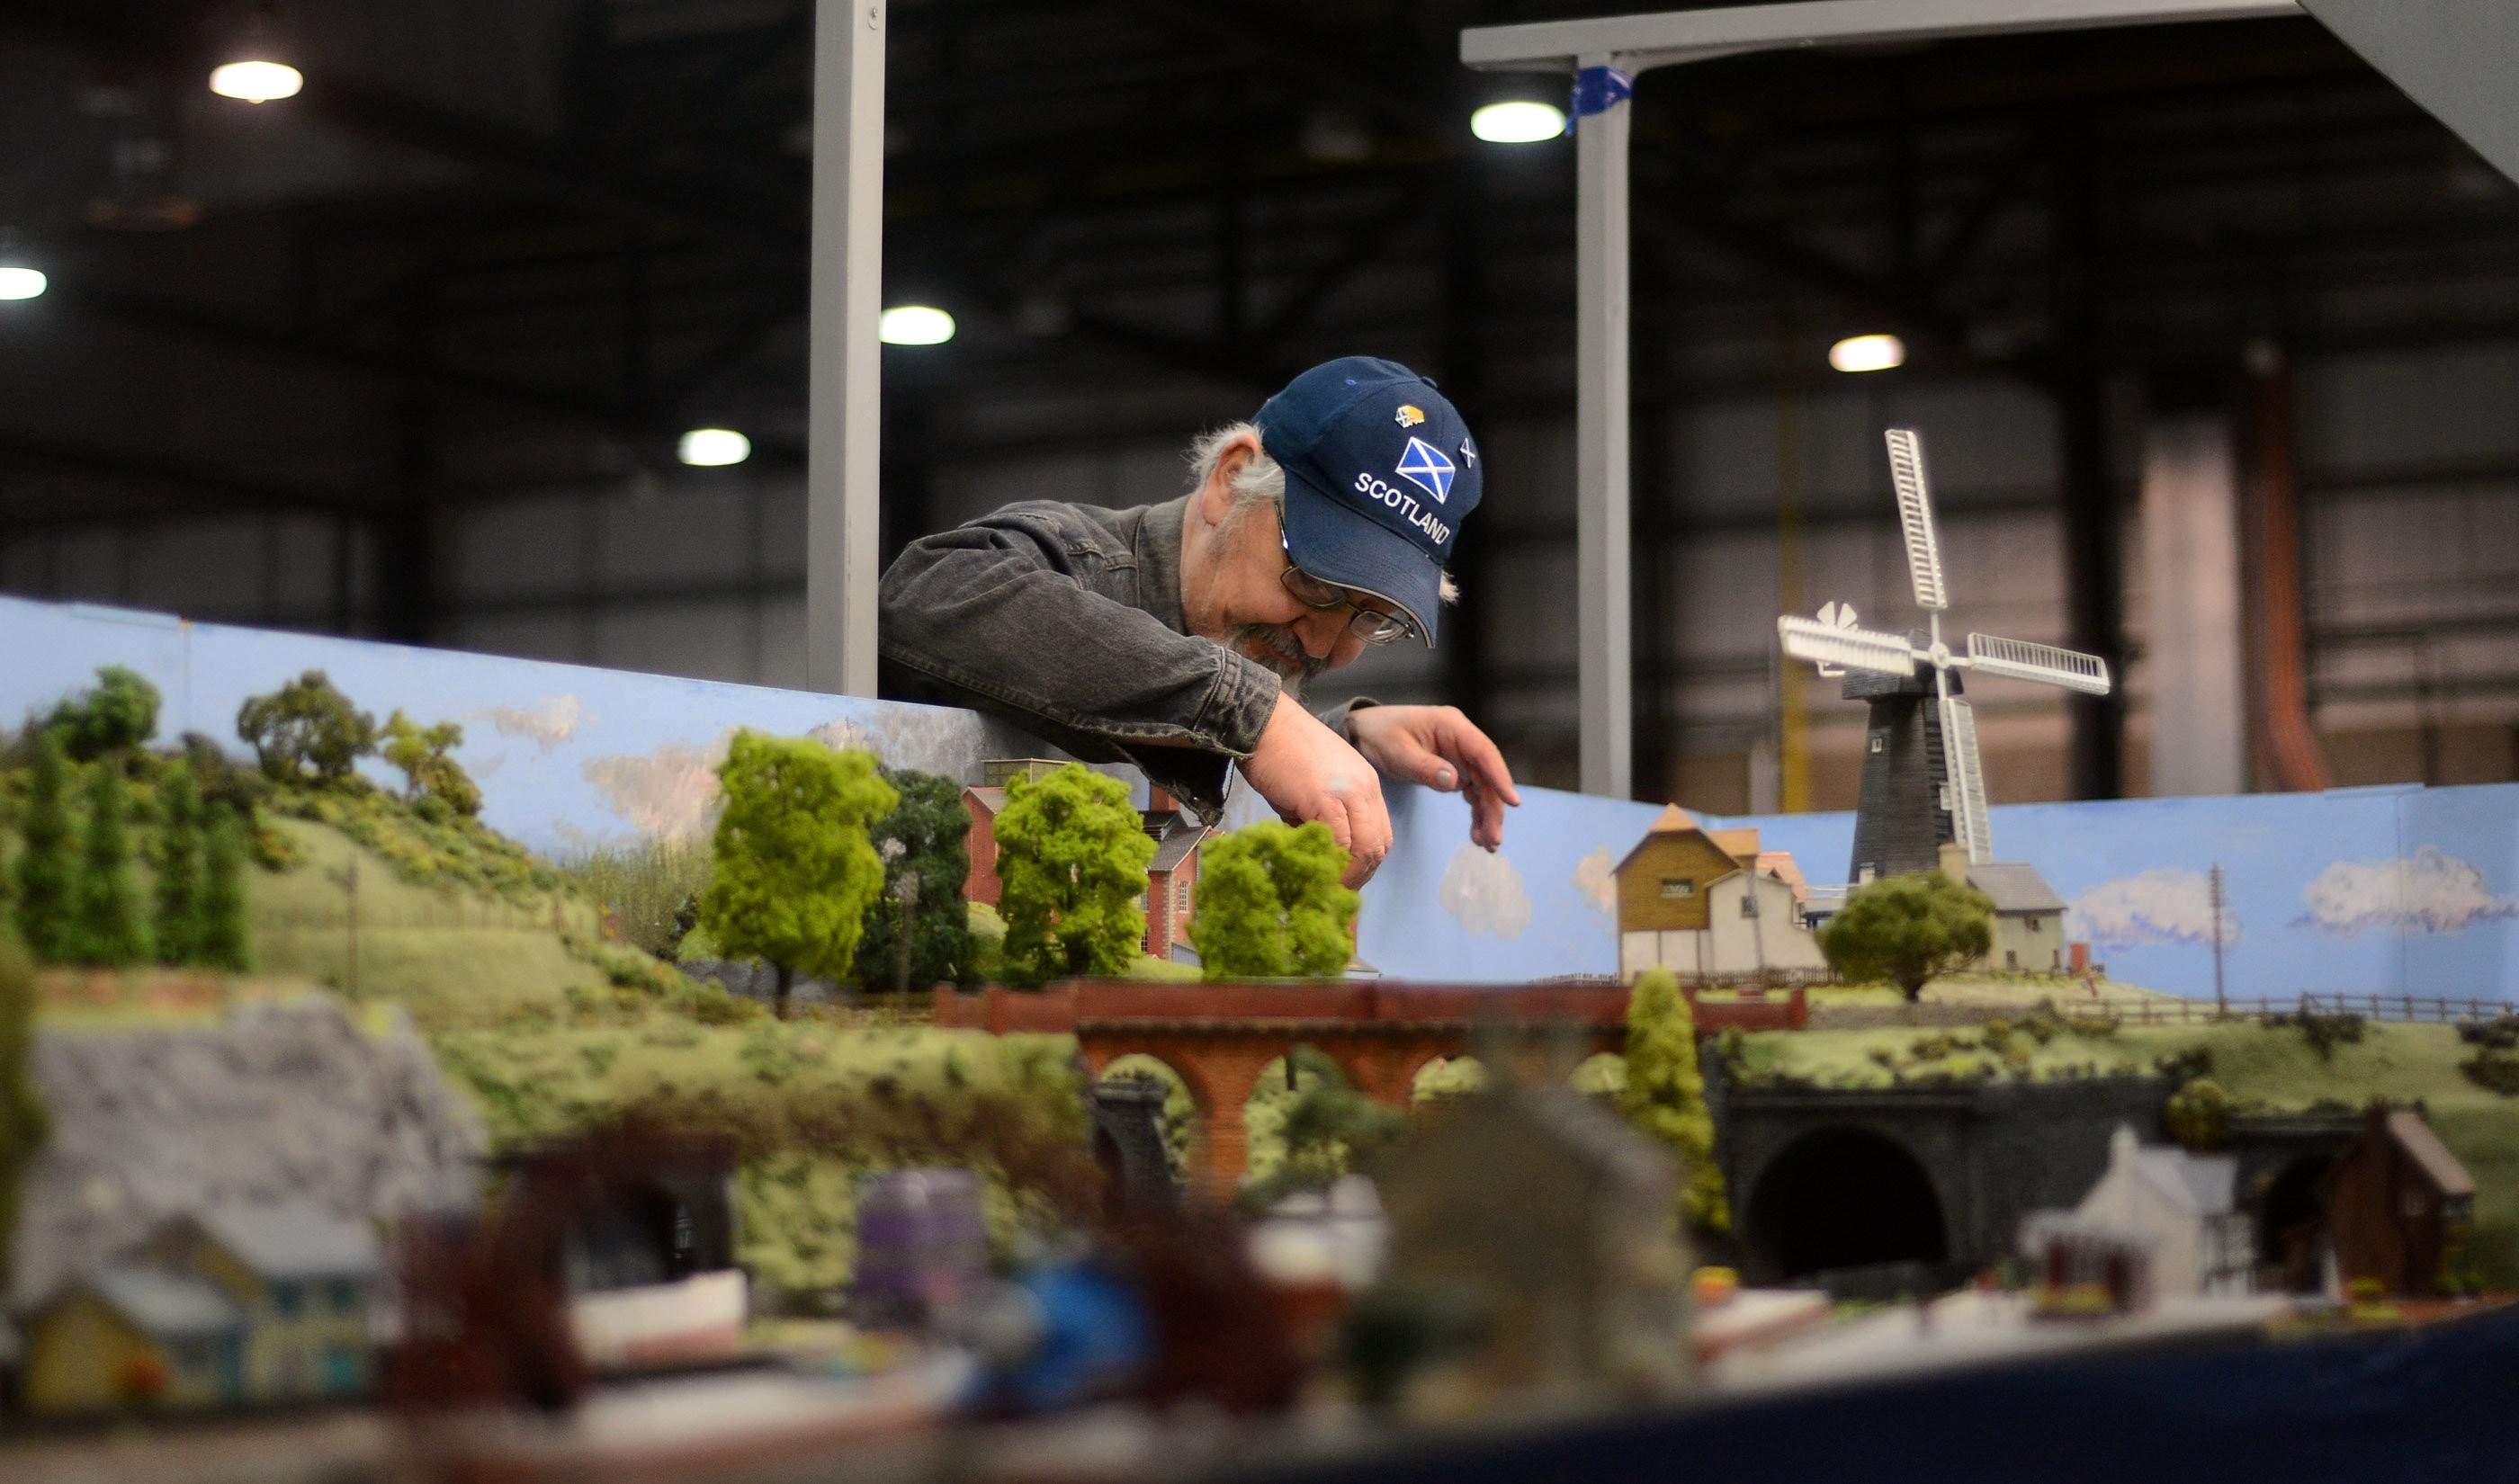 Sandy Oliphant gets his layout ready, a model of the railway stations from Thomas the Tank Engine, Hogwarts Express from Harry Potter and Underground Ernie, ahead of the 50th annual gathering of model railway enthusiasts displaying at Glasgow's SECC from tomorrow, Friday 26th to Sunday 28th Febuary, where 30 different clubs from across the UK and further are expected to display. See Centre Press story CPRAIL; Thousands of model railway enthusiasts gather for convention.